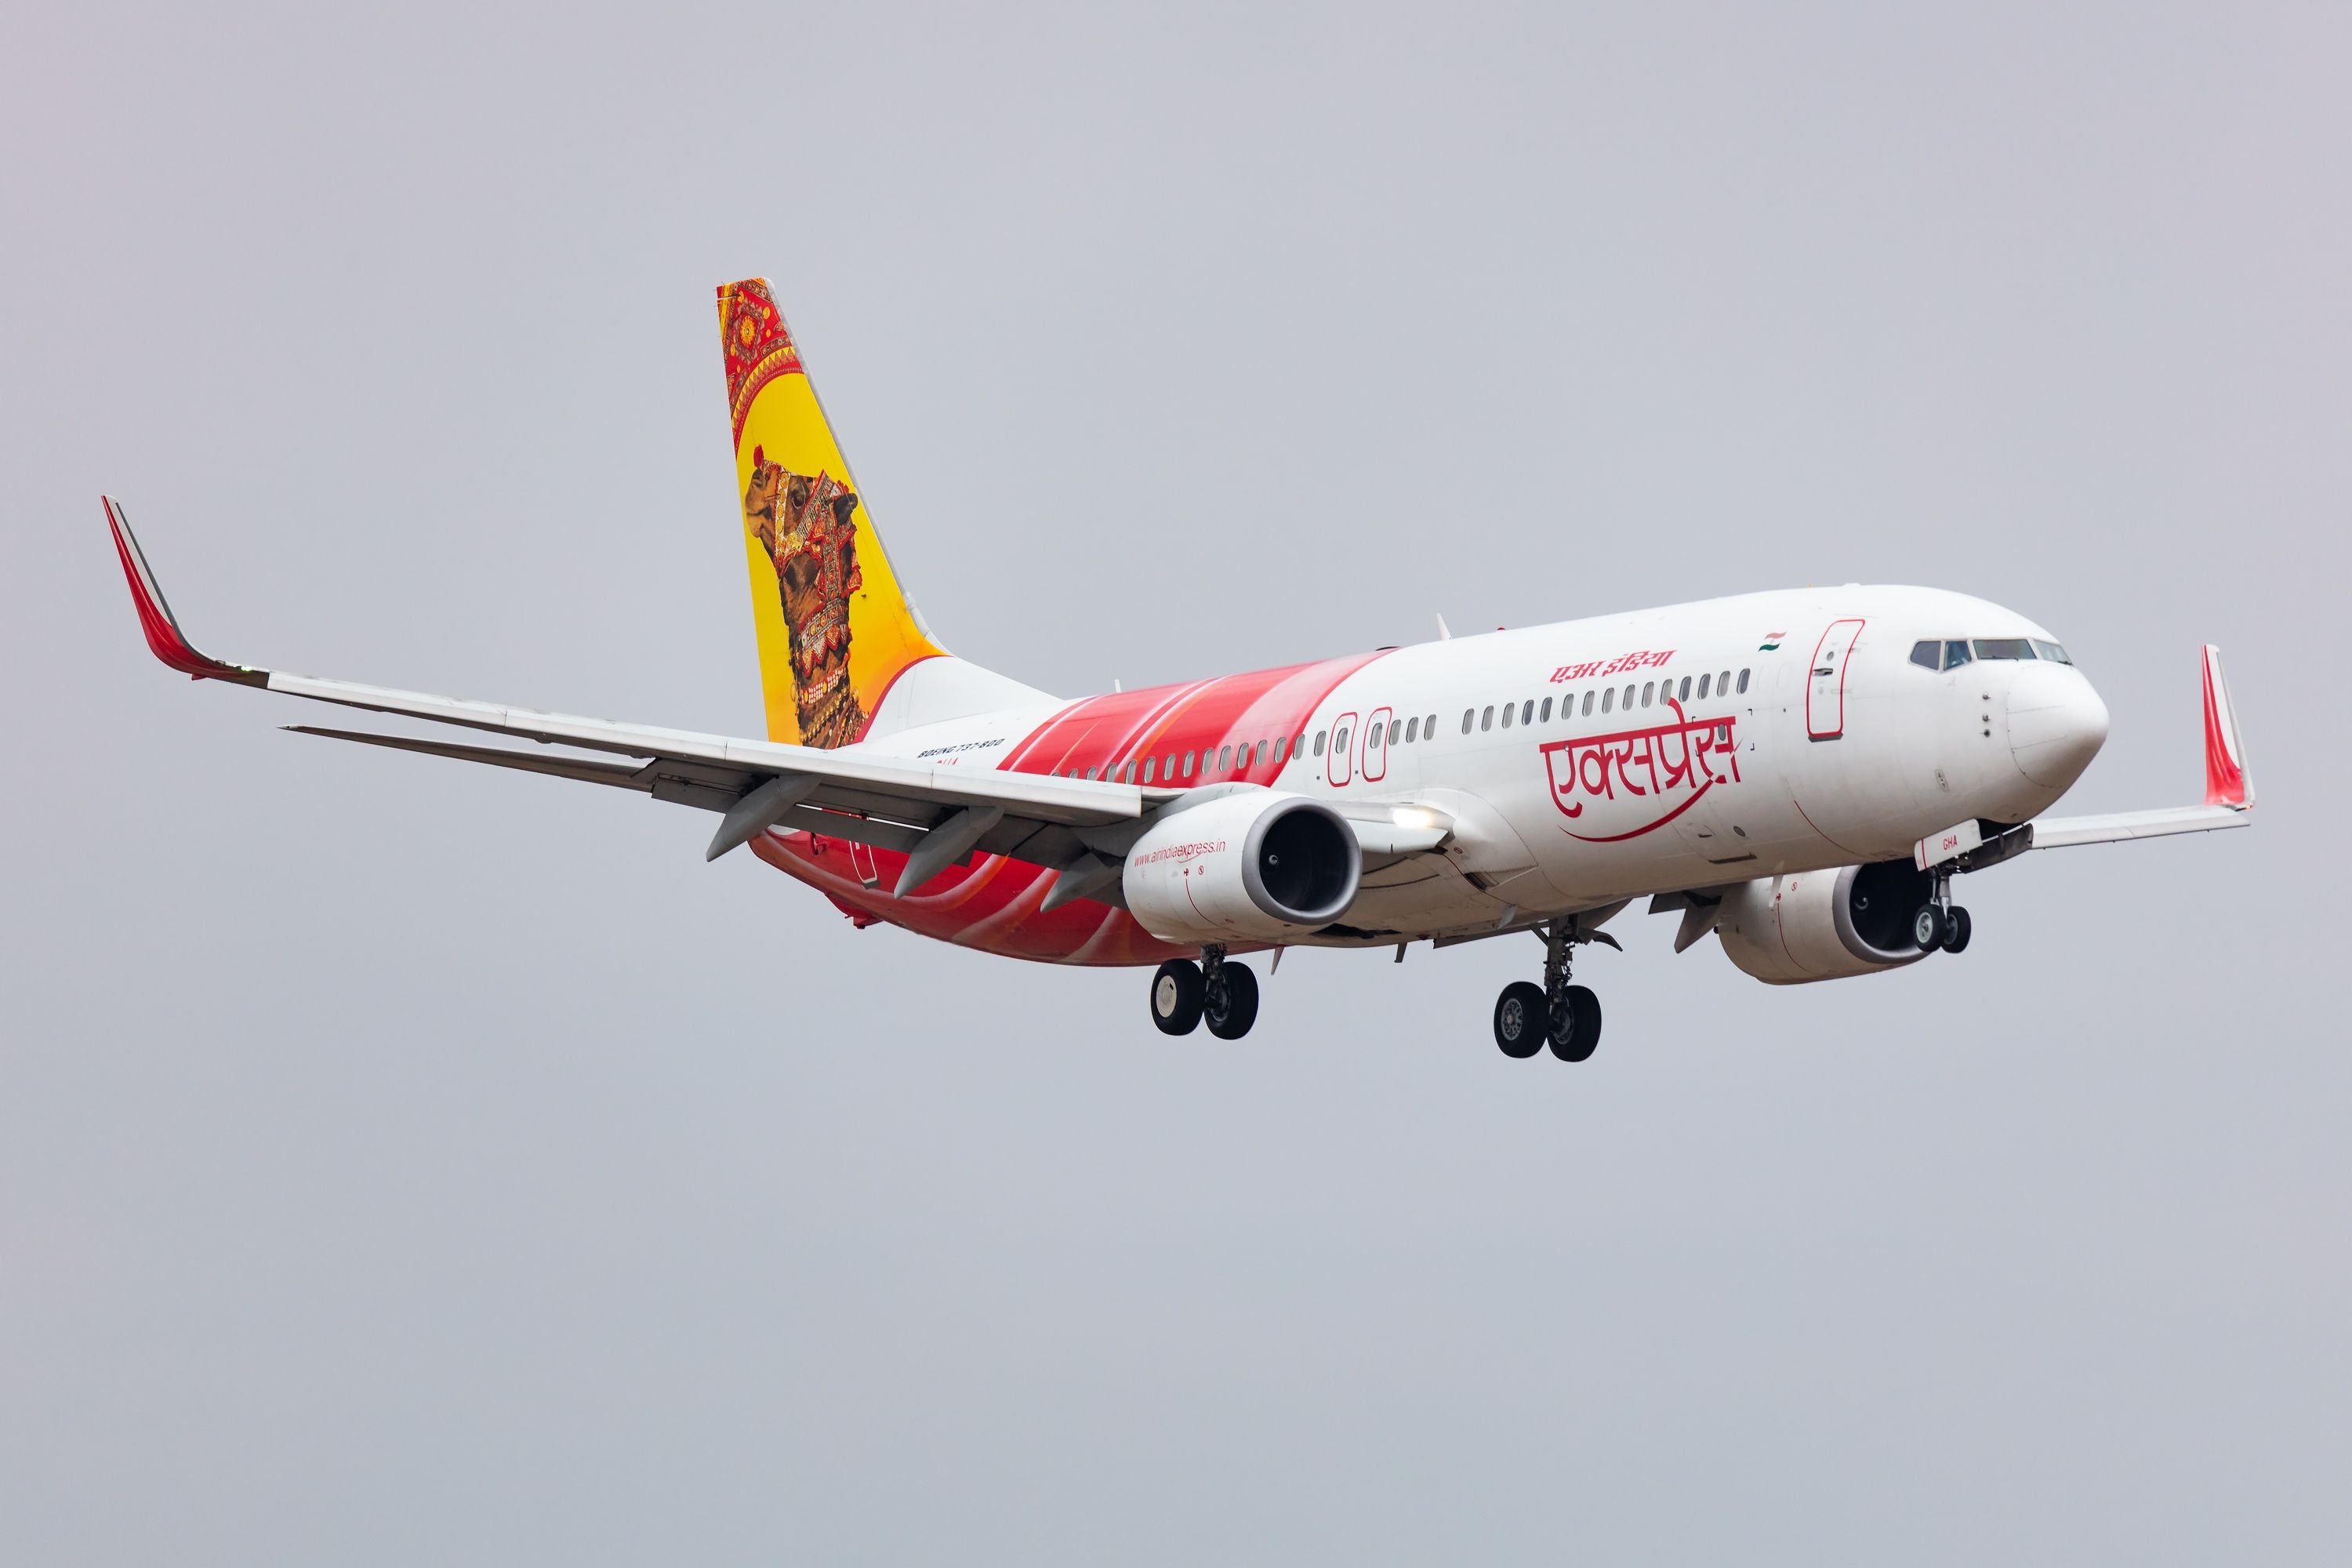 Air India Express Website Records Surge In Bookings After Recent Changes